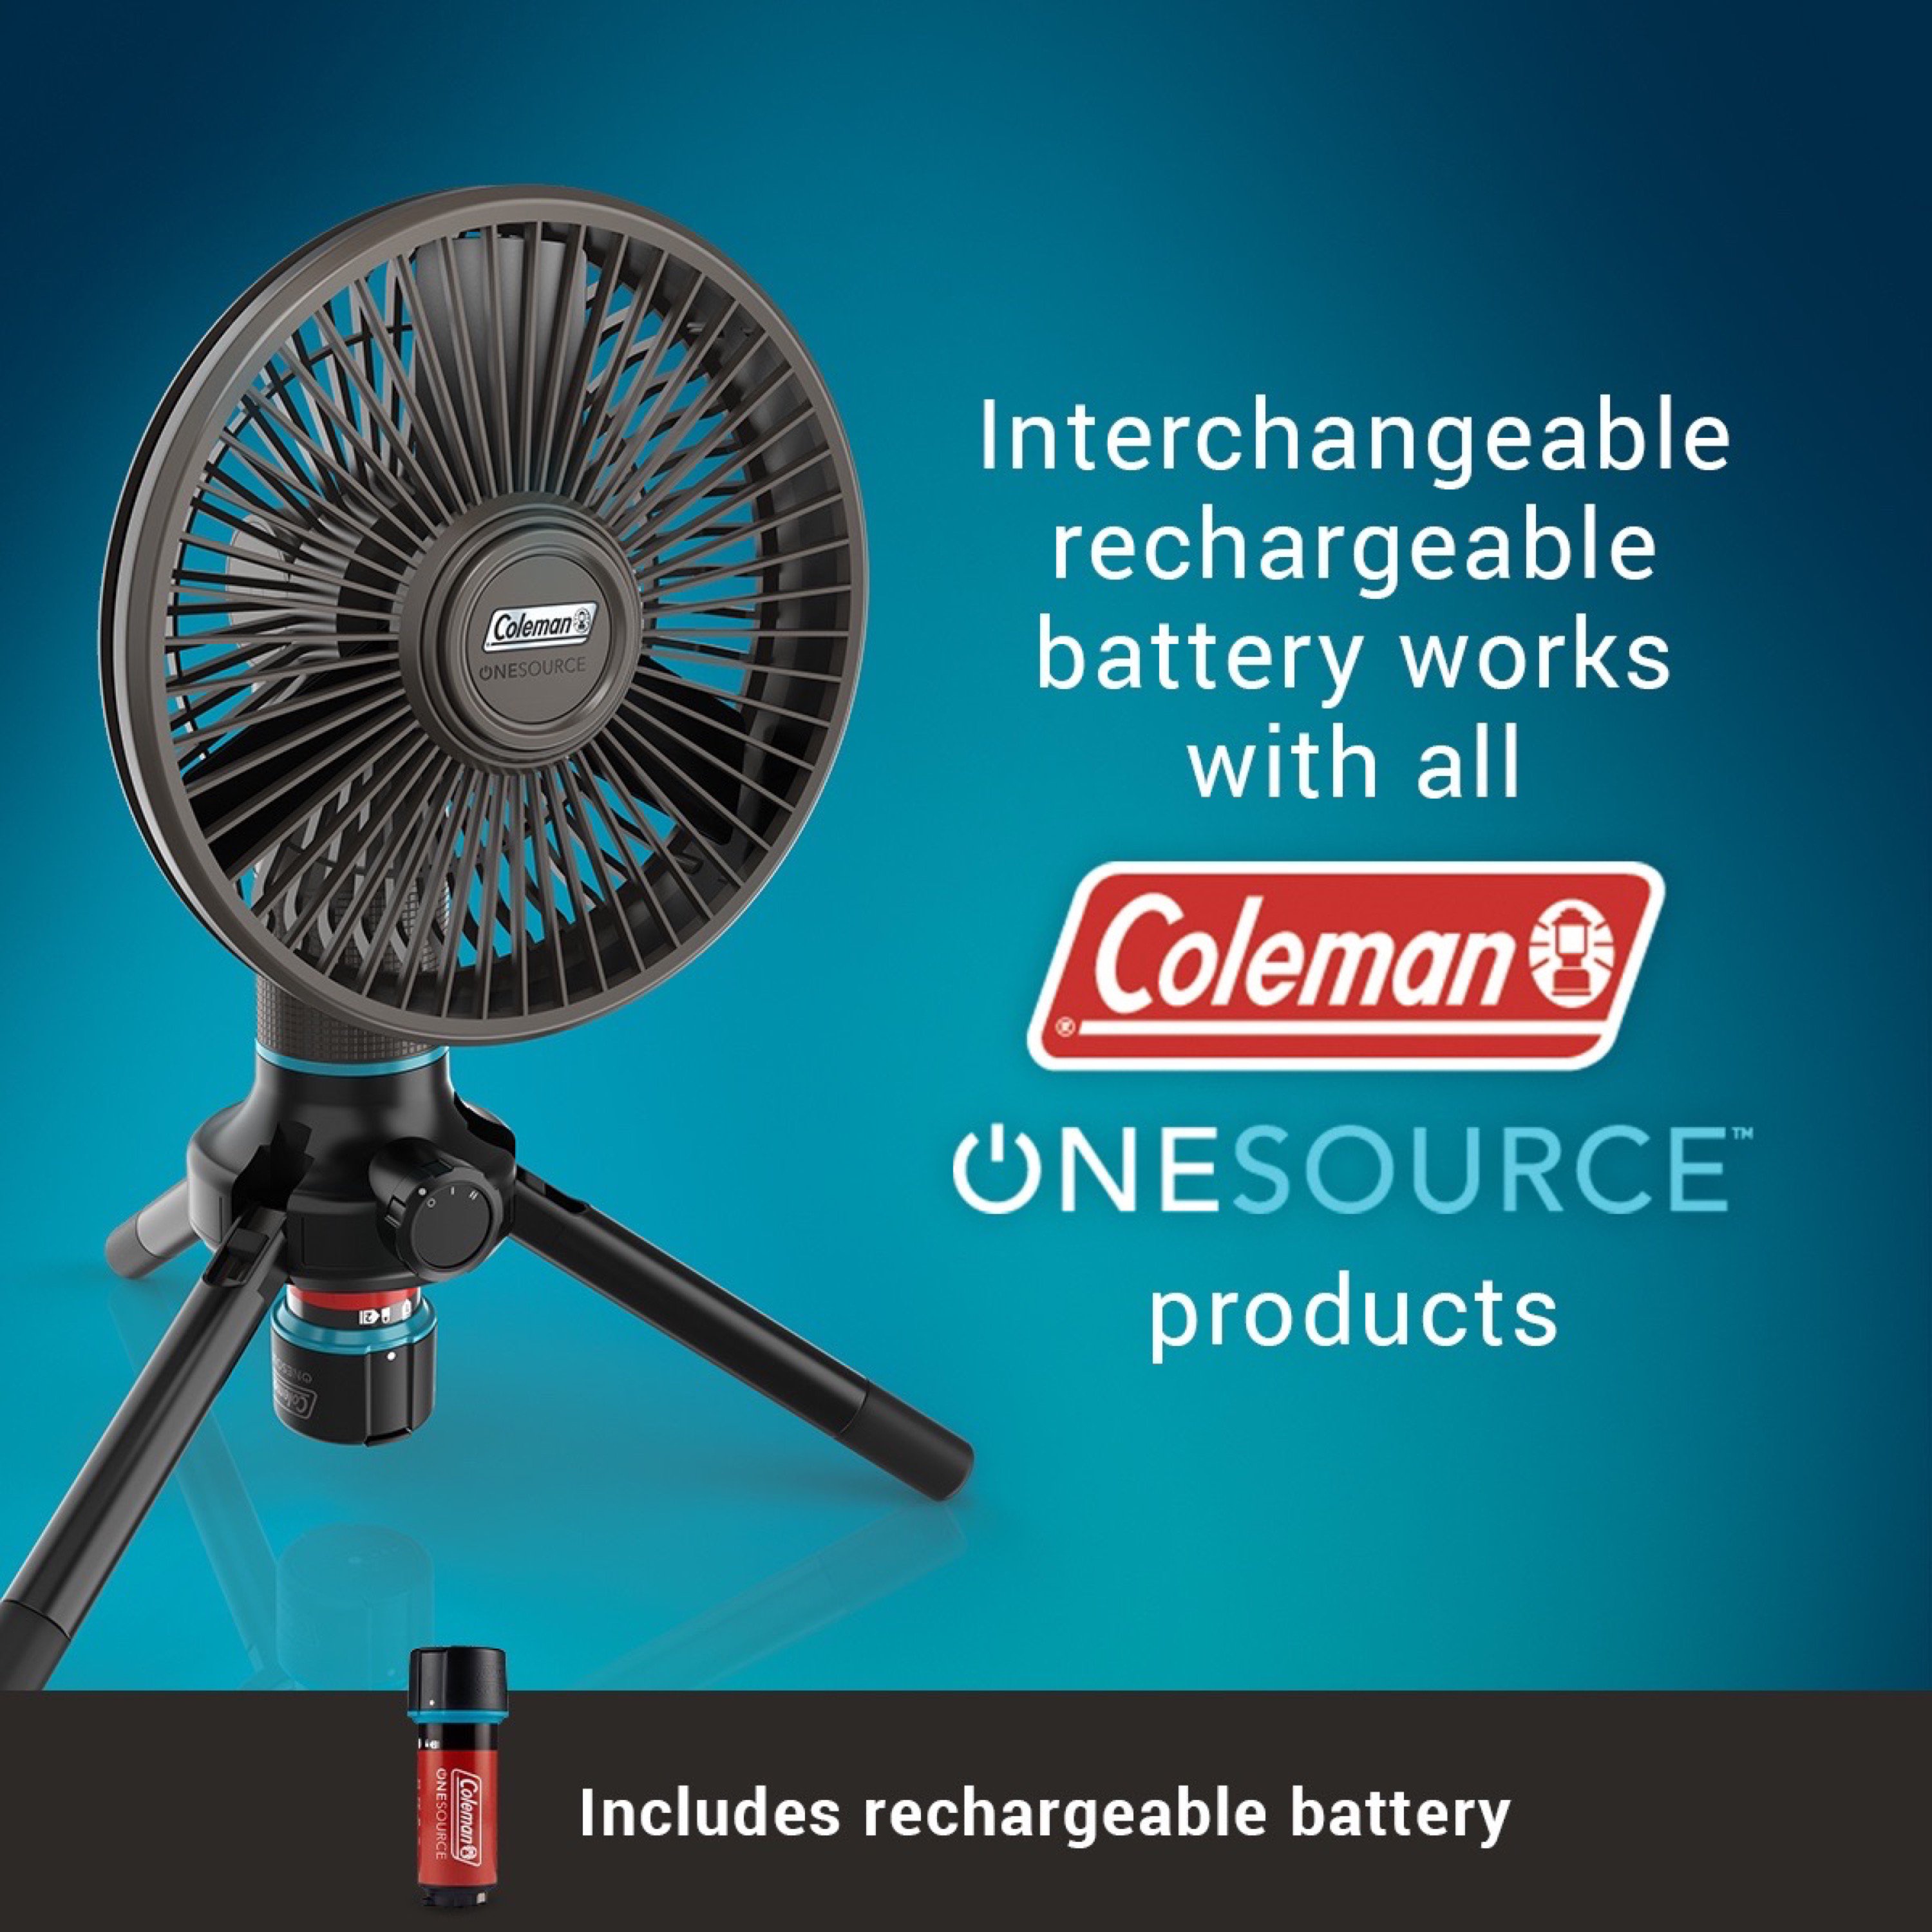 Coleman Onesource Multi-Speed Portable Fan & Rechargeable Battery, Black, Built in Flash Light - image 2 of 8